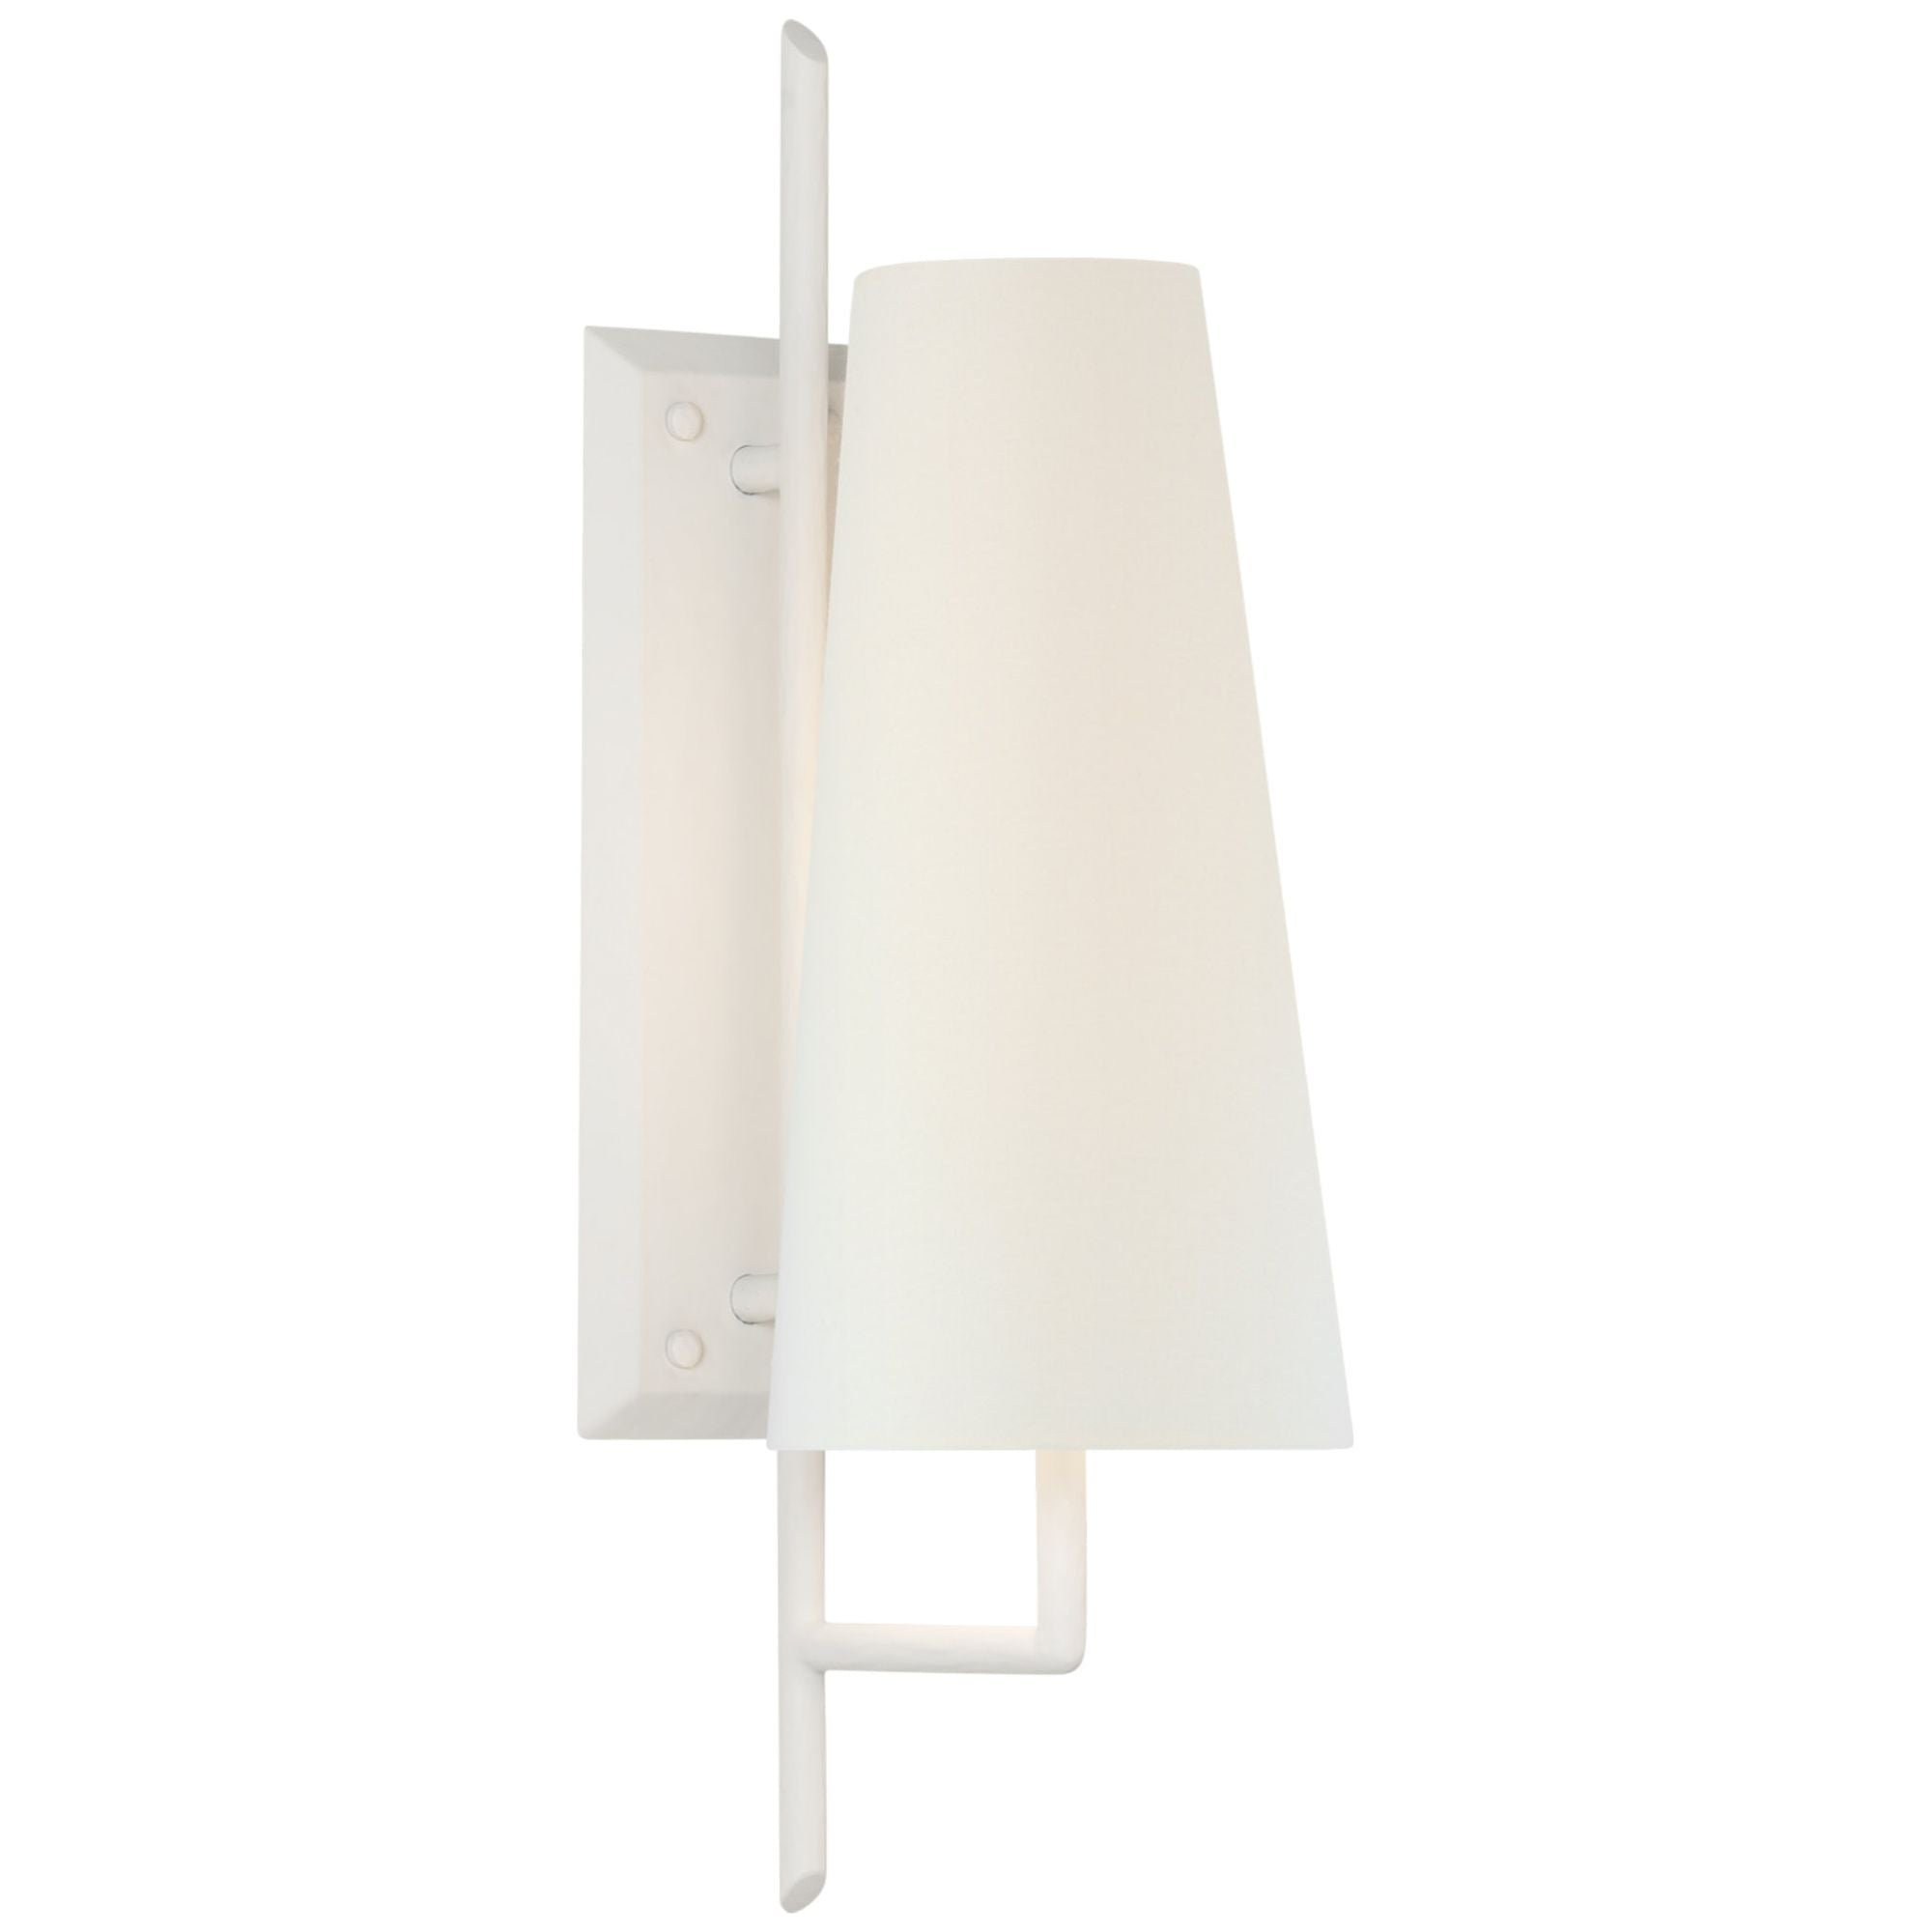 Chapman & Myers Ashton Large Single Sculpted Sconce in Plaster White with Linen Shade